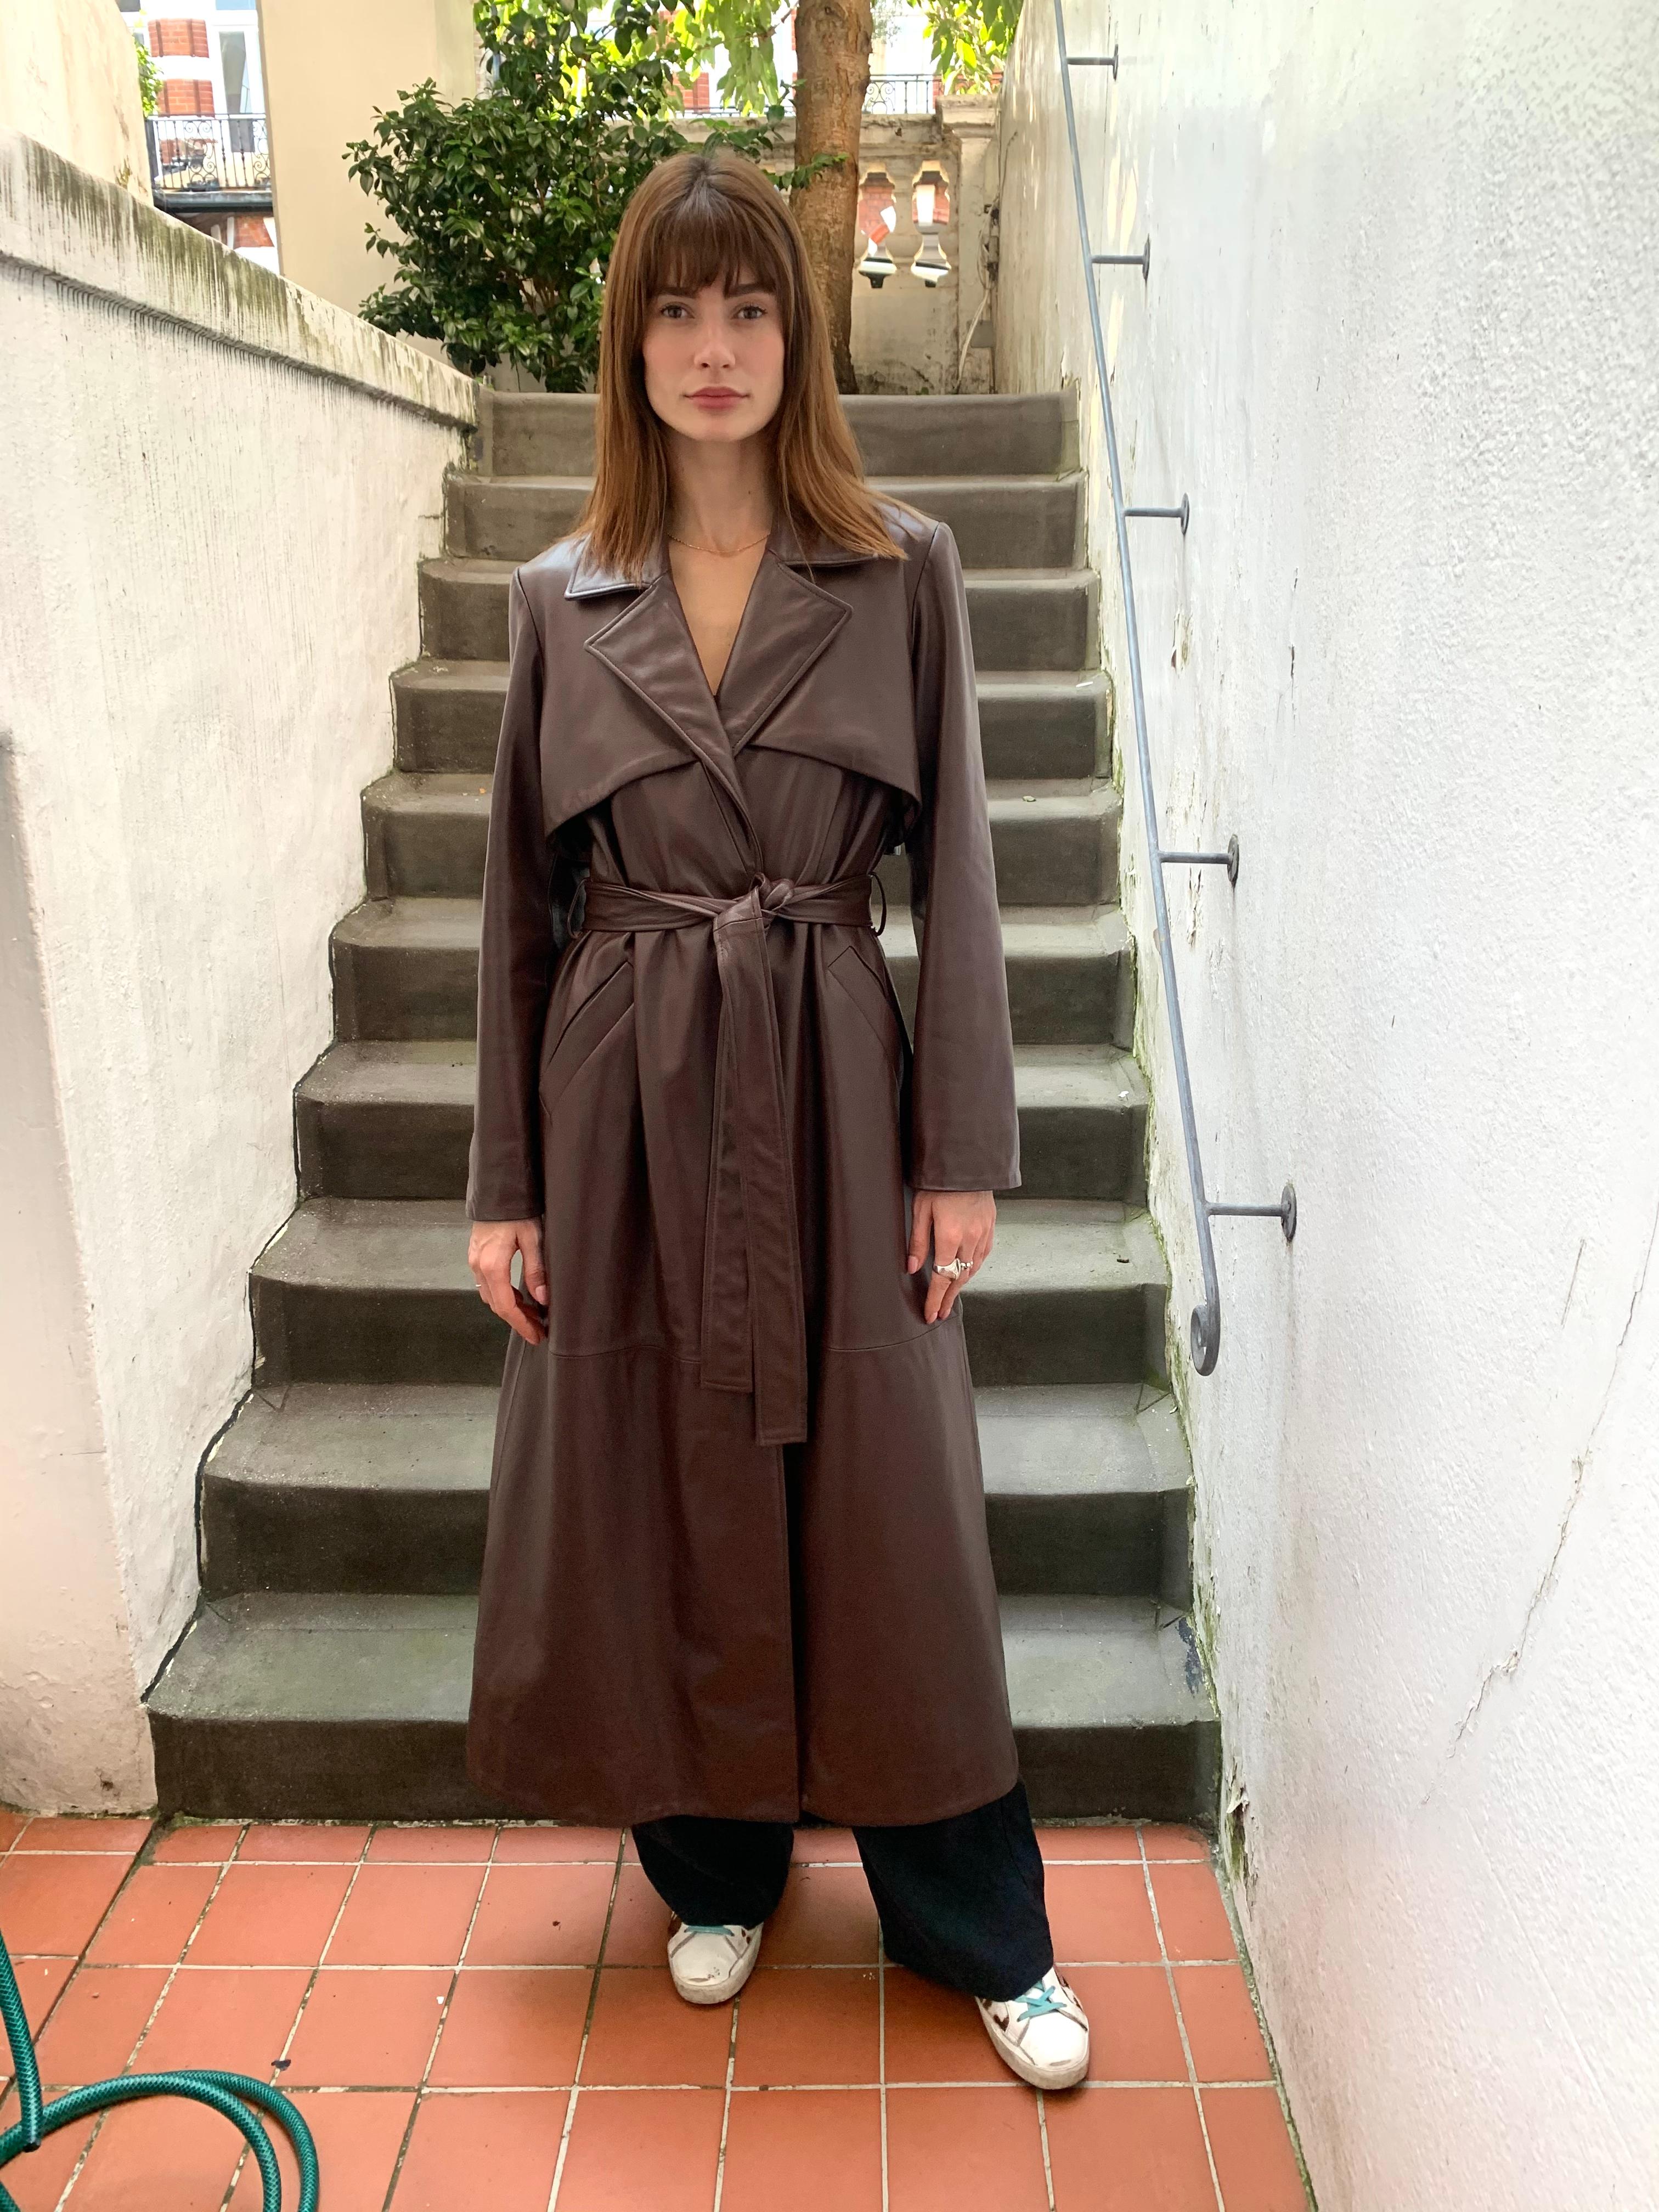 Verheyen London Leather Trench Coat in Chocolate Brown - Size uk 14 For Sale 2